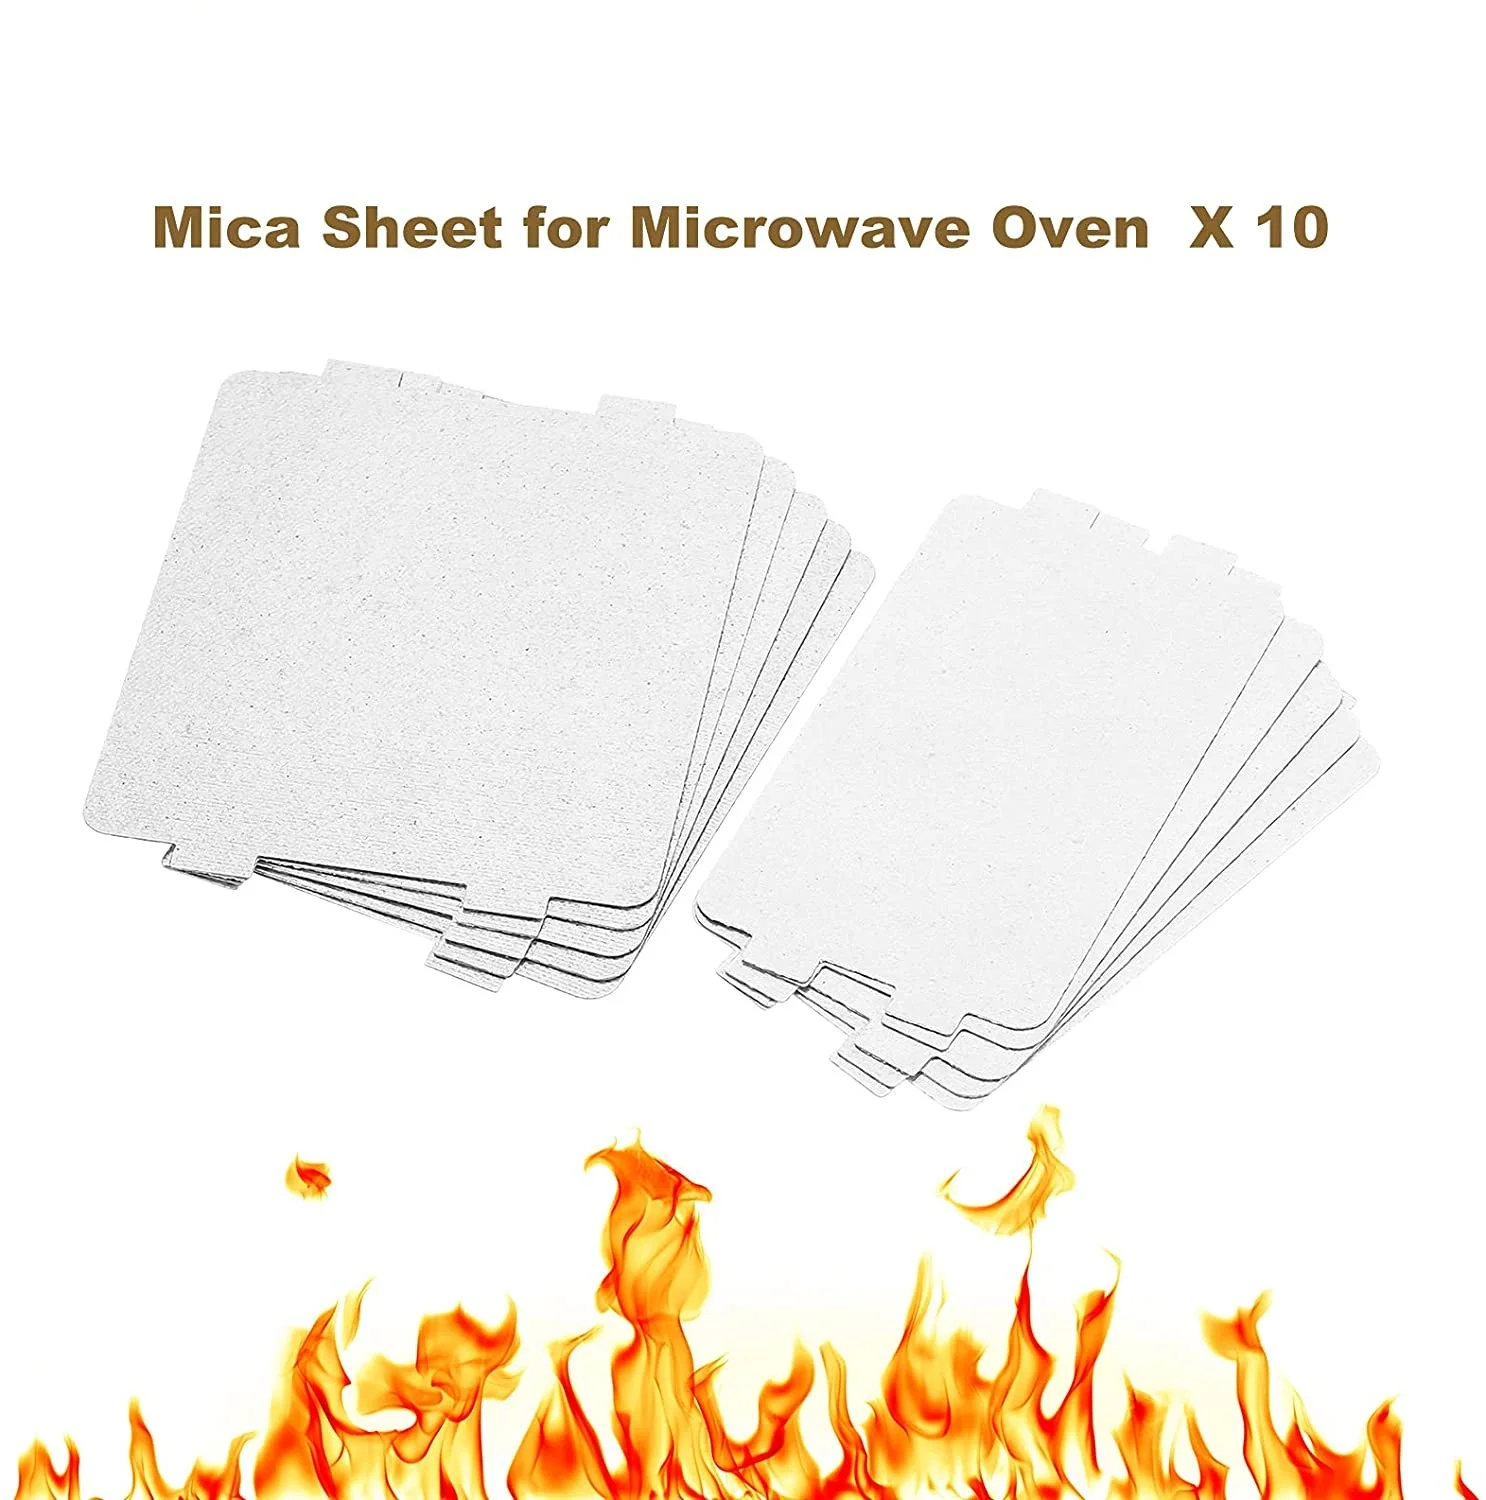 

10pcs/lot Mica Sheet Plates Waveguide Cover Electric Microwave Oven Repalcement Part Cut To Size Kitchen Universal Utensils